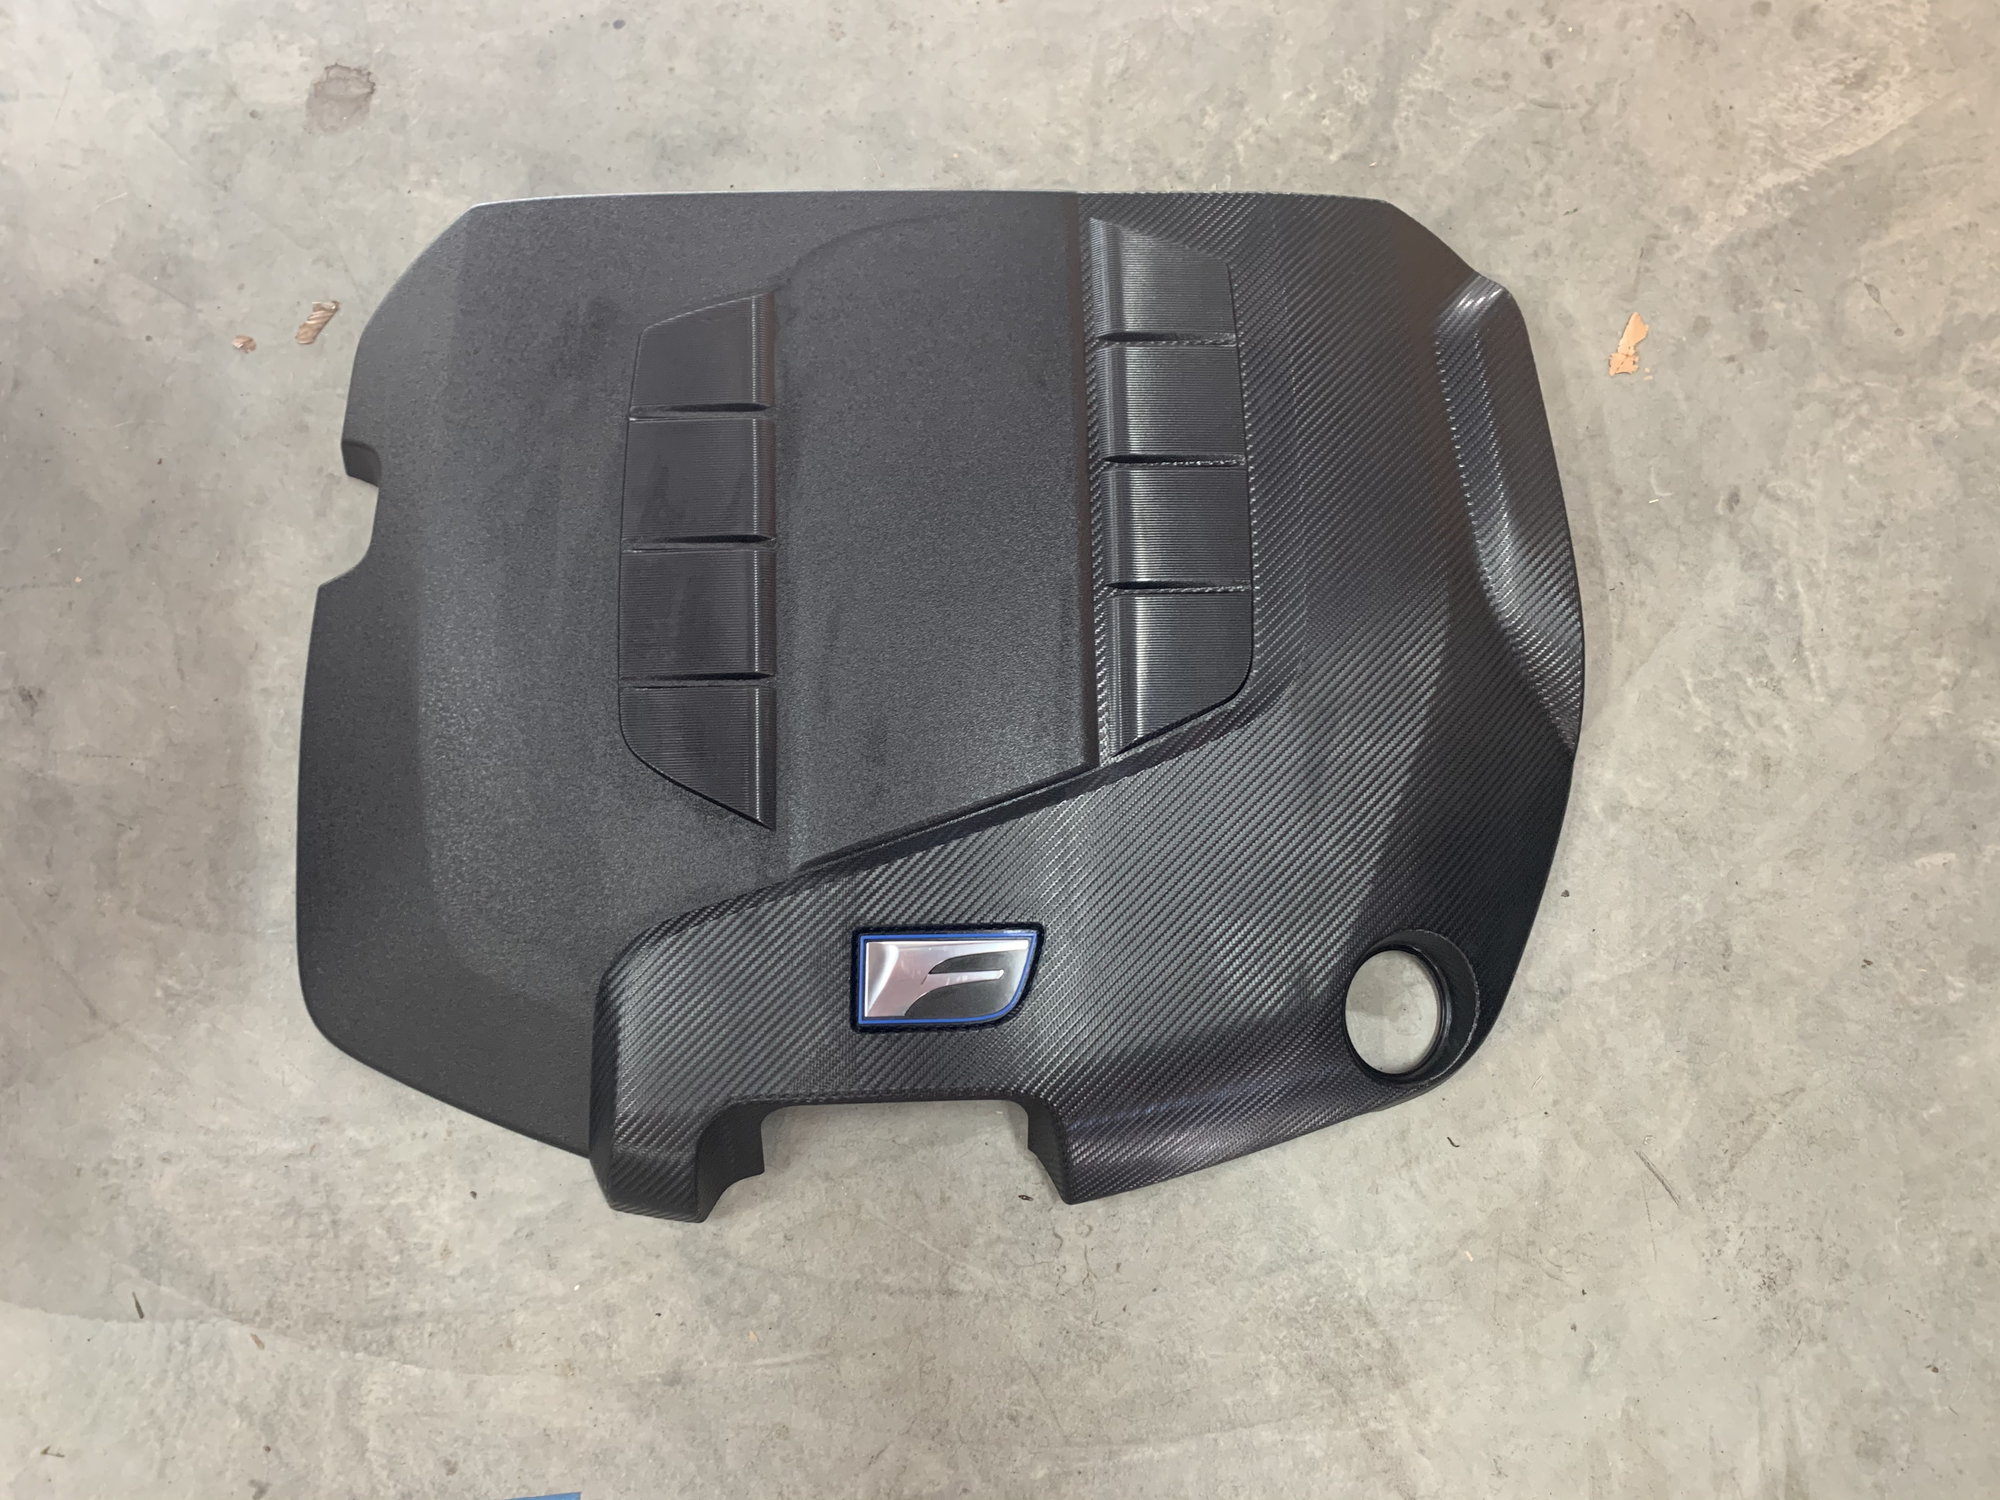 Accessories - Black ISF Engine Cover - Used - Bay Area, CA 94086, United States